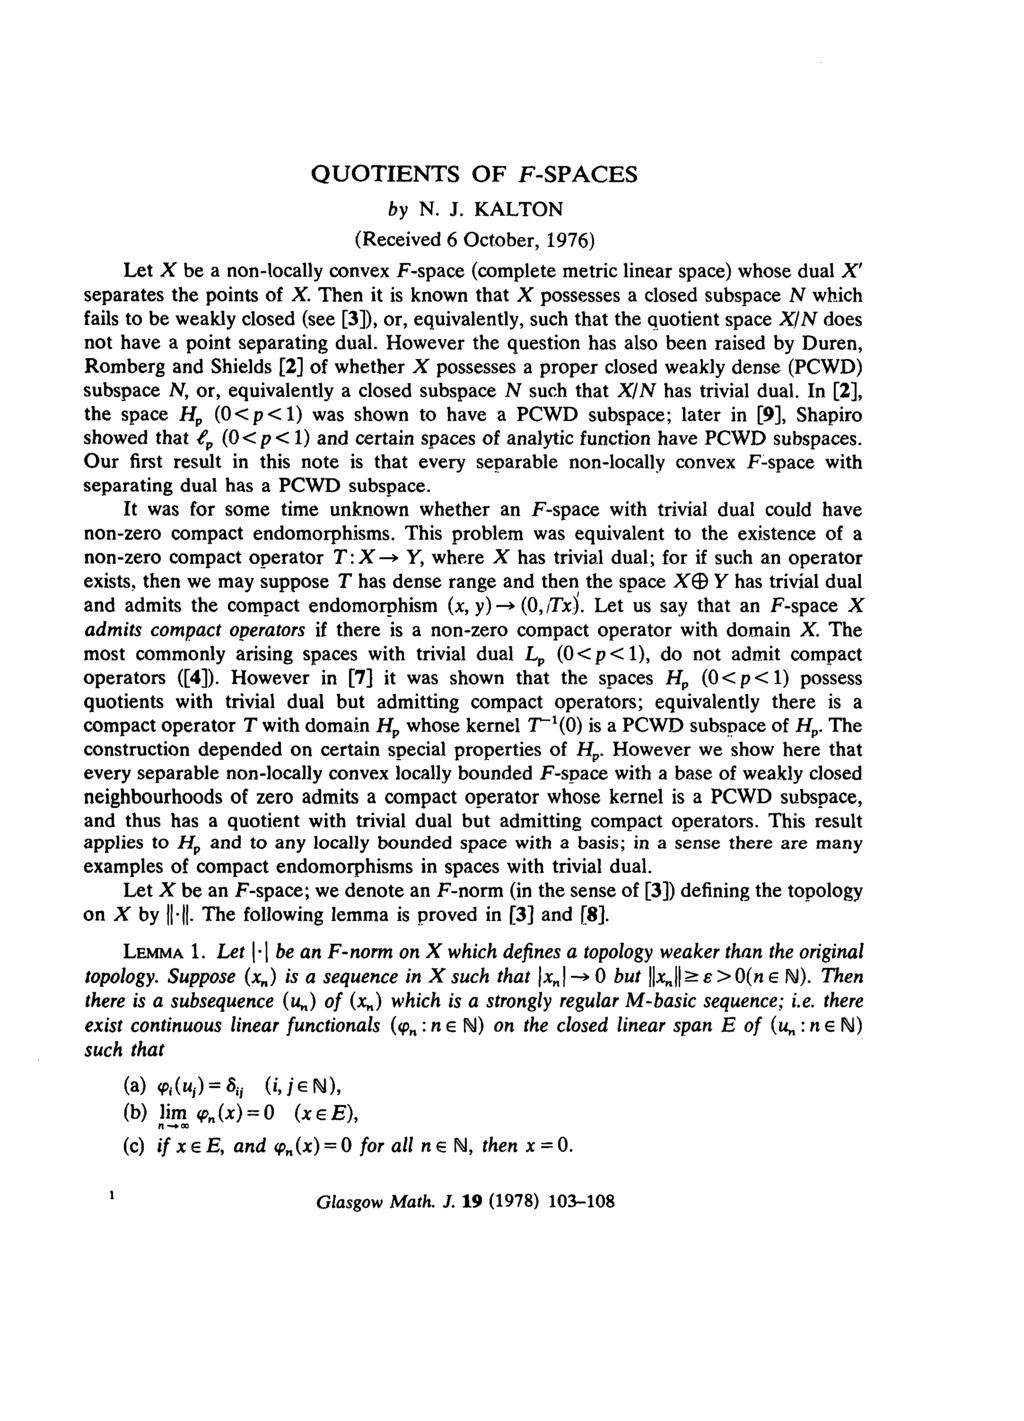 QUOTIENTS OF F-SPACES by N. J. KALTON (Received 6 October, 1976) Let X be a non-locally convex F-space (complete metric linear space) whose dual X' separates the points of X.